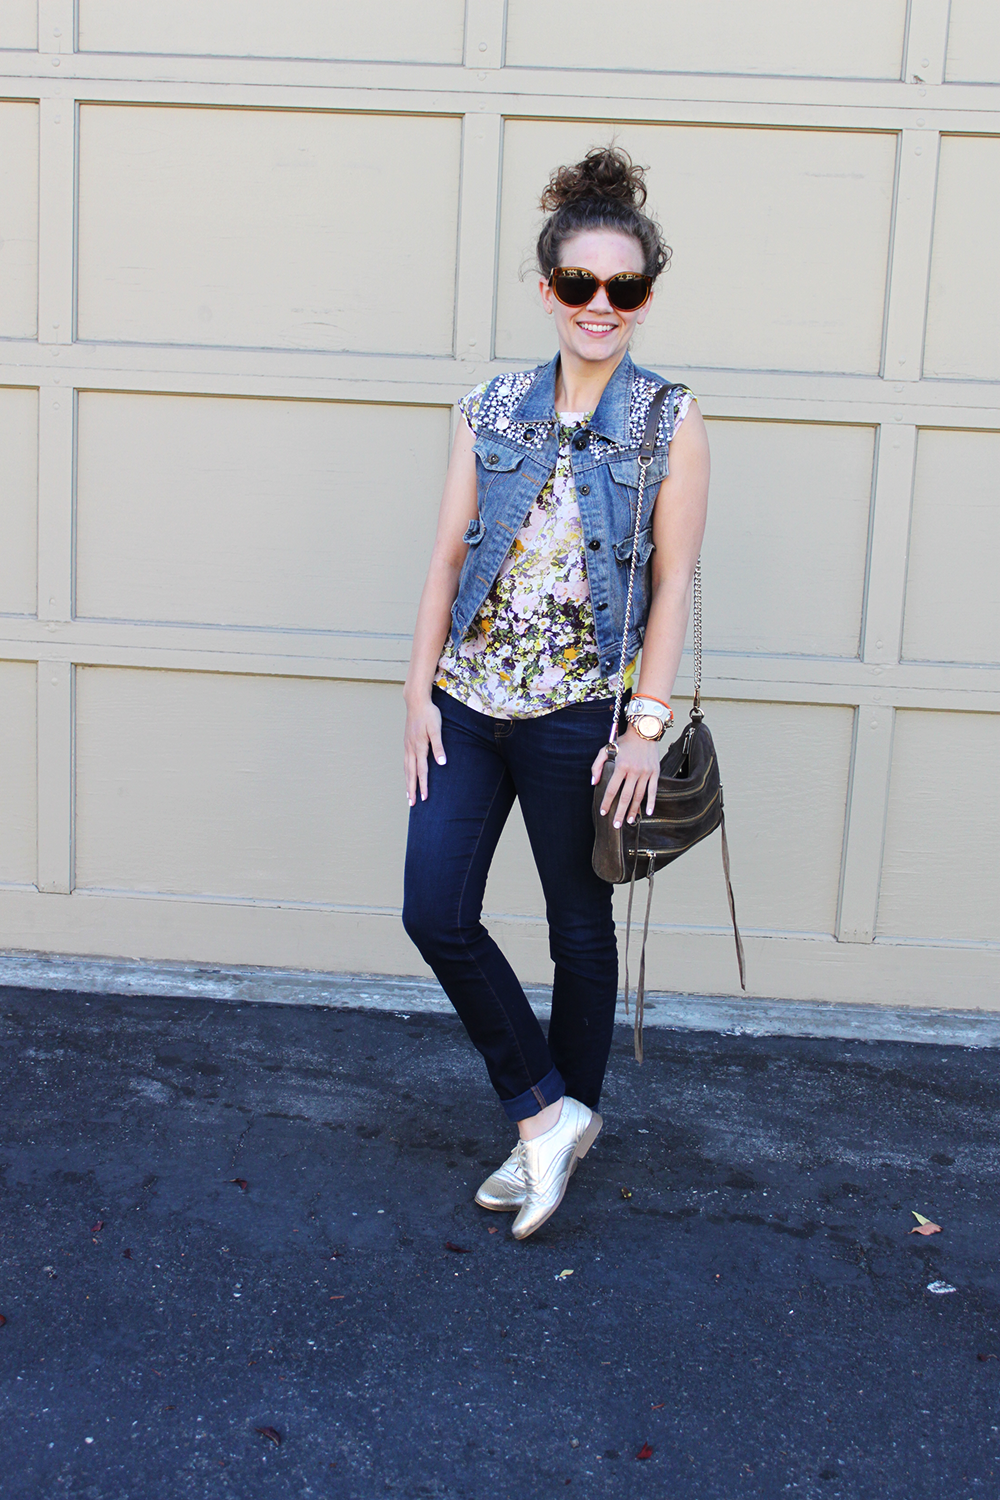 toughen up floral with denim and metallic accents - undeniable style